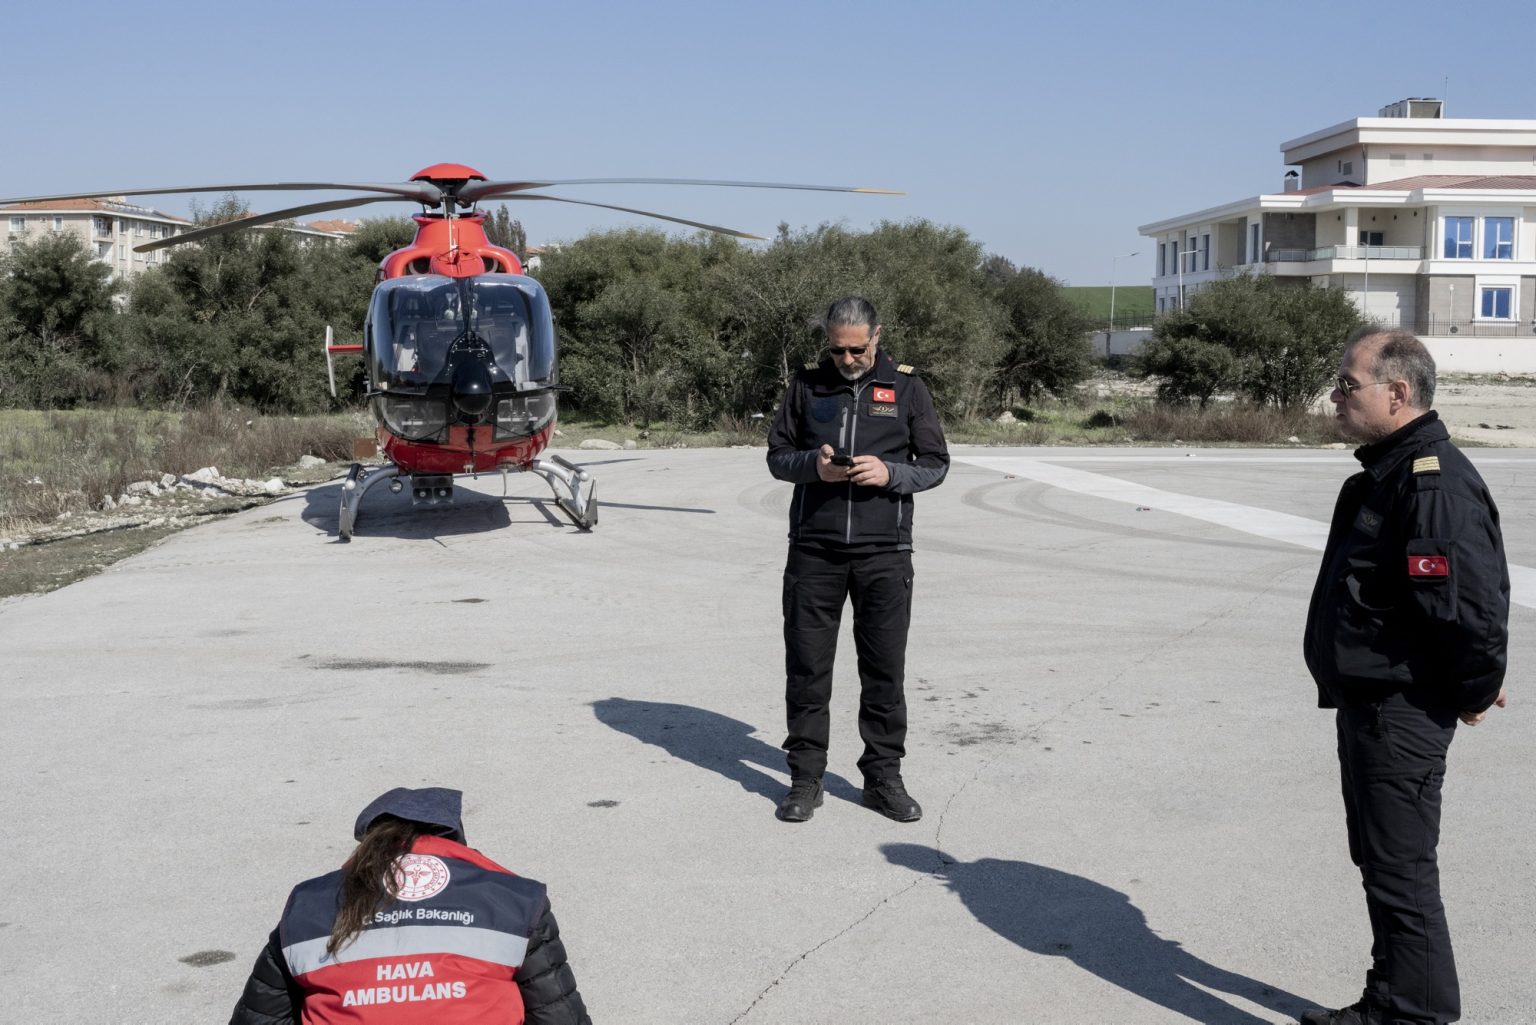 Antakya, Turkey, February 2023 - The aftermath of the earthquake that hit southern Turkey and northern Syria. Helicopter pilots wait in the courtyard adjacent to the filed hospital ready to leave.><
Antakya, Turchia, febbraio 2023  Le conseguenze del terremoto che ha colpito la Turchia del Sud e la Siria del nord.